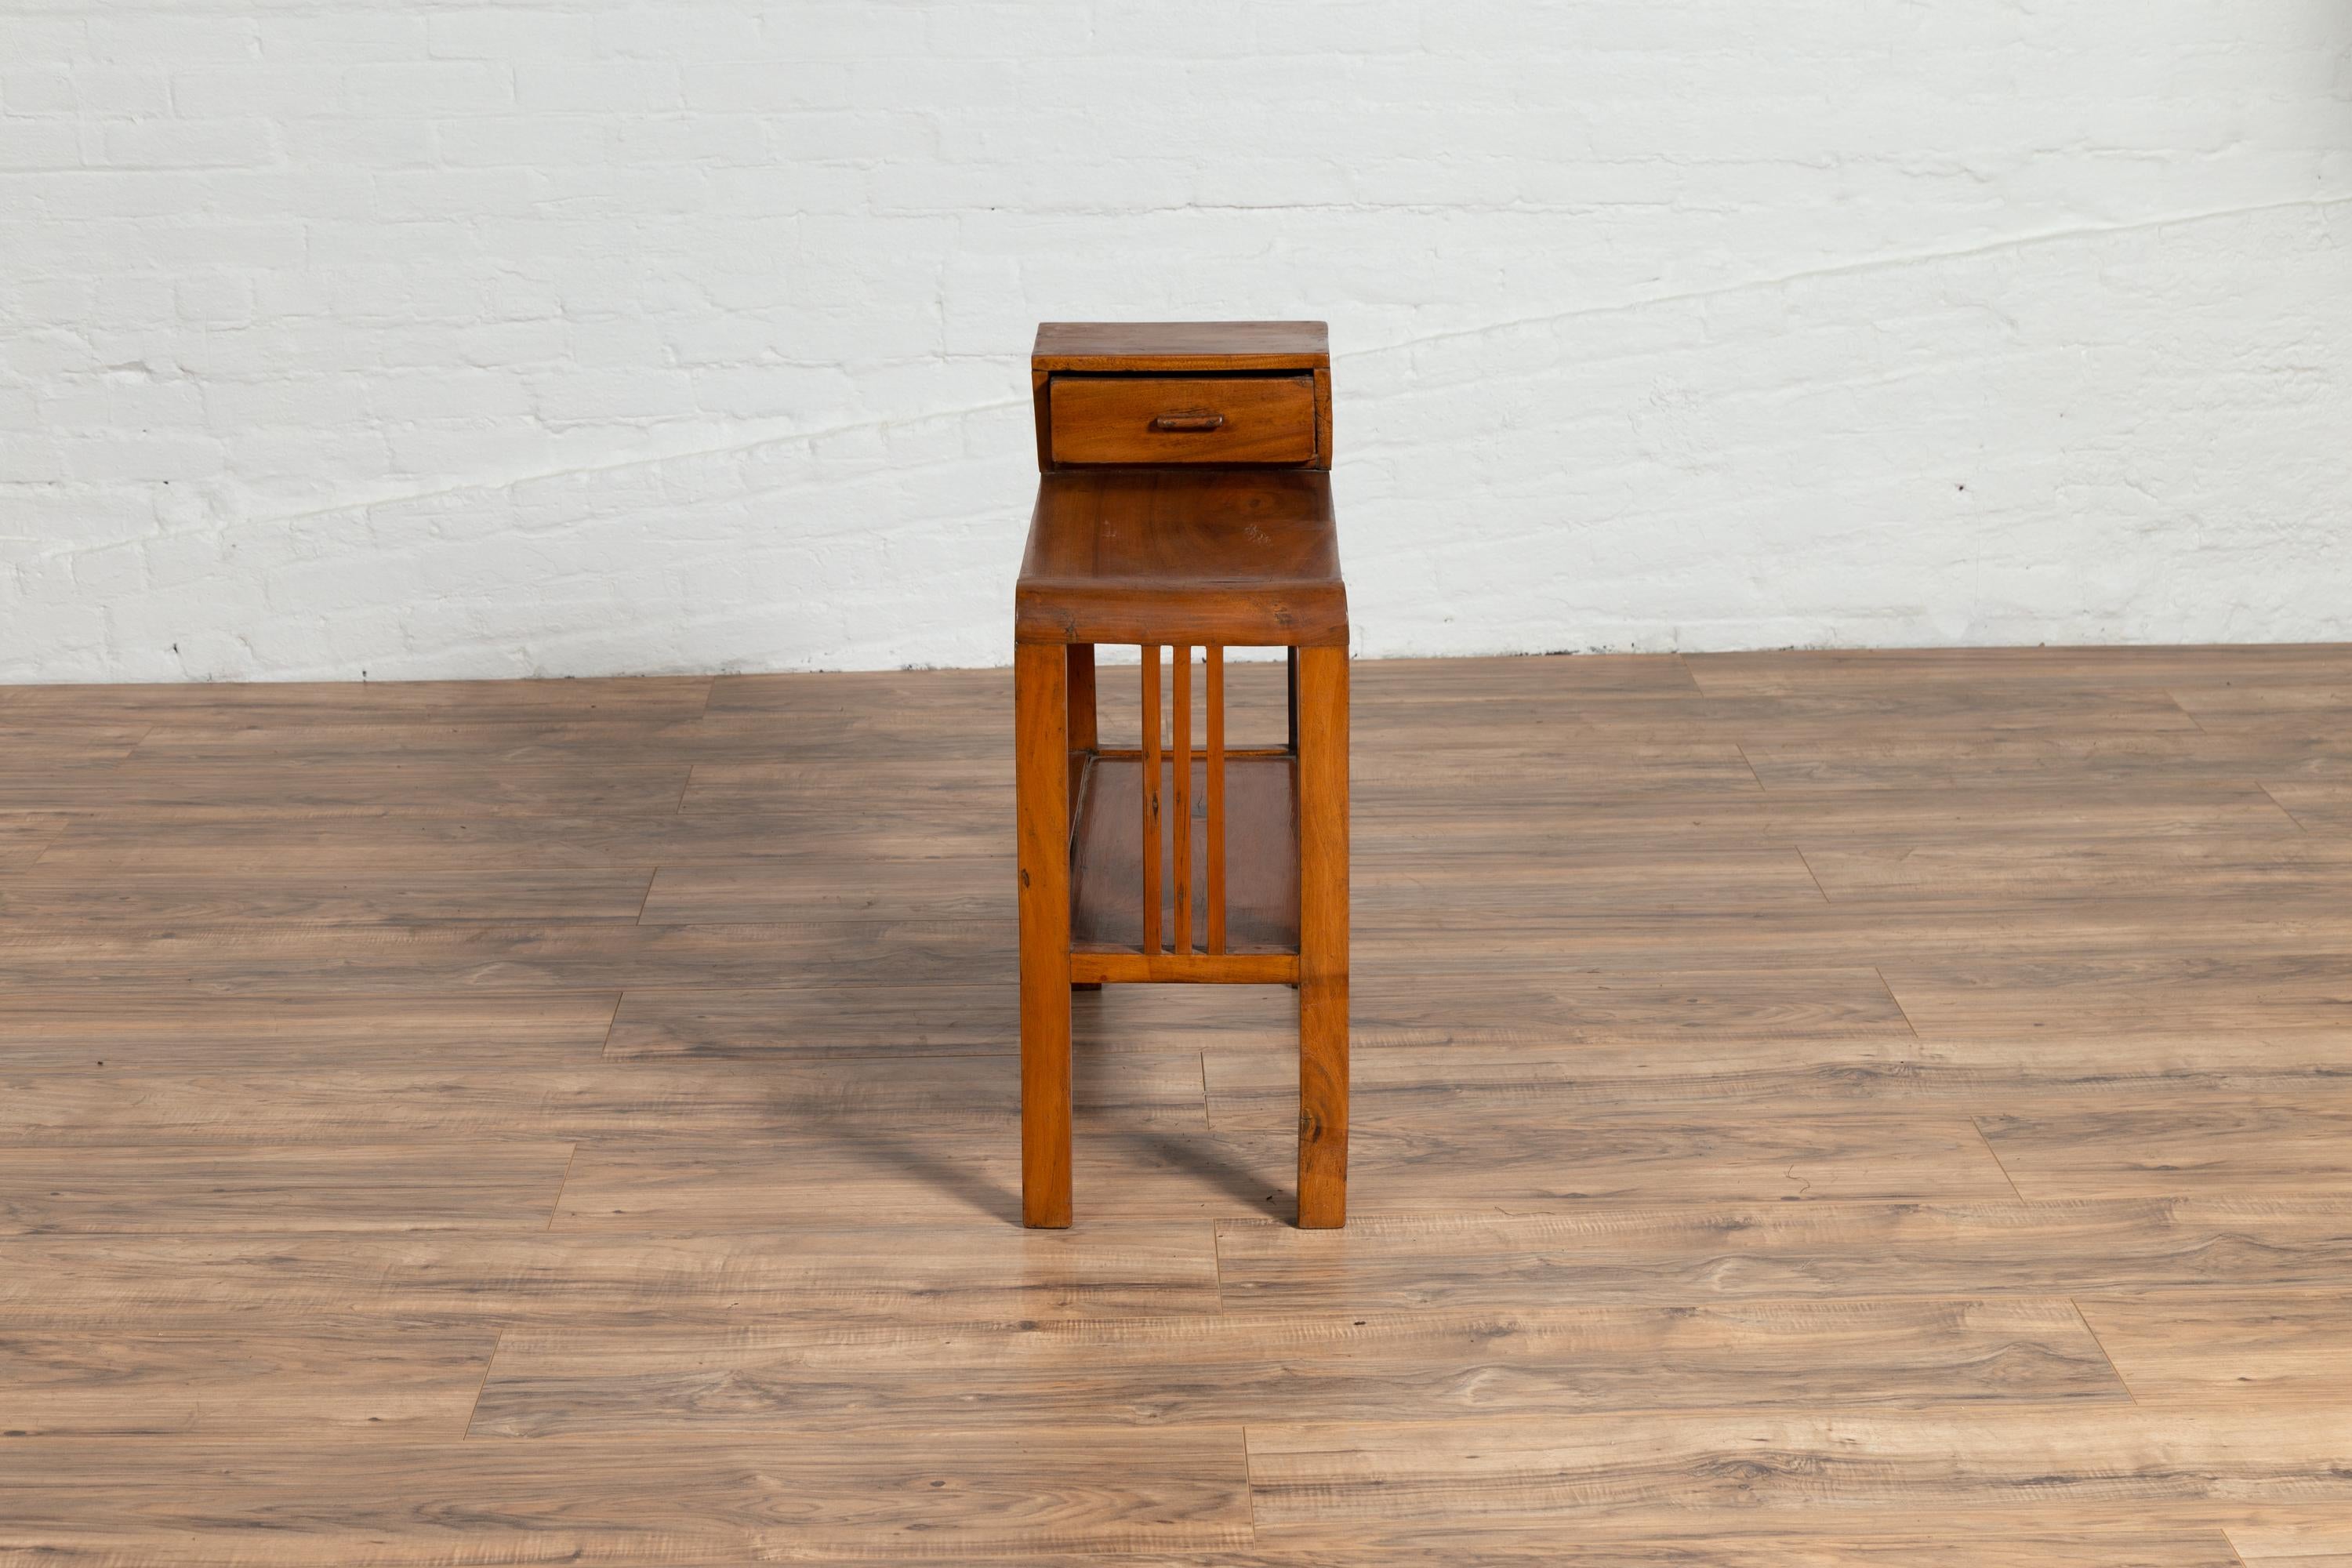 An Indonesian vintage Dutch Colonial side table from the mid-20th century, with single drawer, lower shelf and straight legs. Born in Indonesia during the mid-century period, this unusual side table features a single drawer, sitting above a narrow